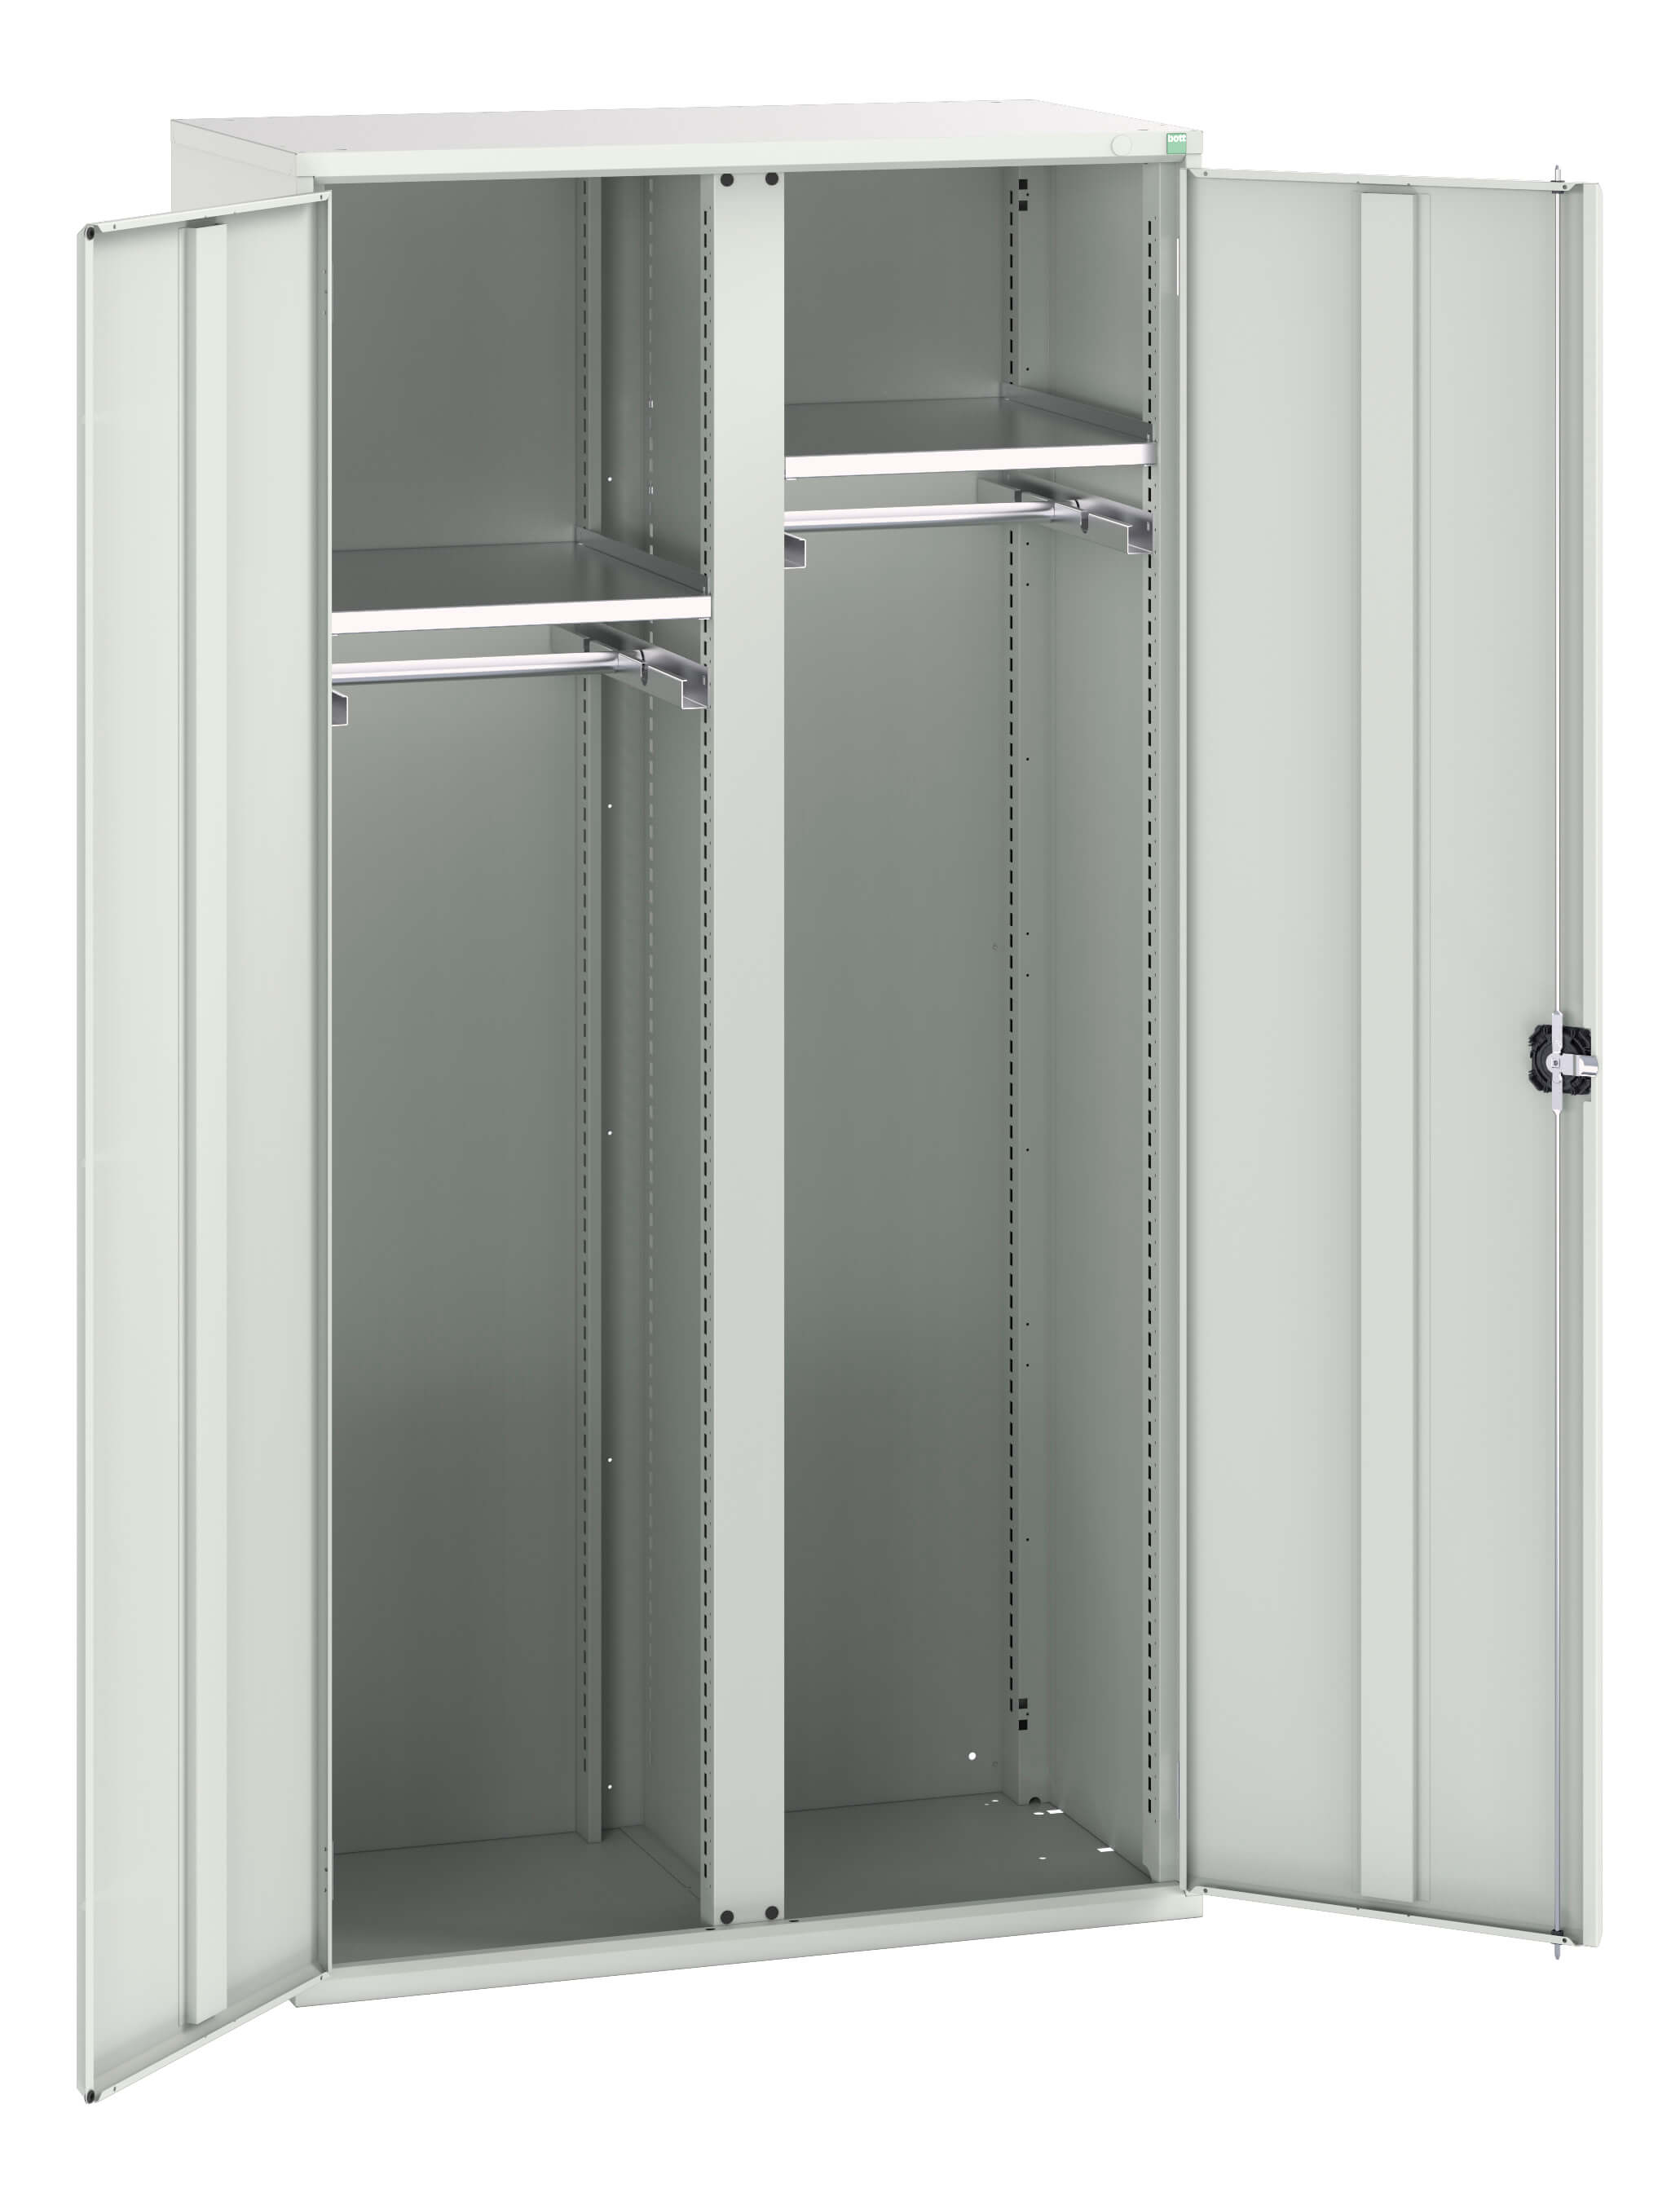 Bott Verso Ppe / Janitorial Kitted Cupboard With Vertical Partition - 16926578.16